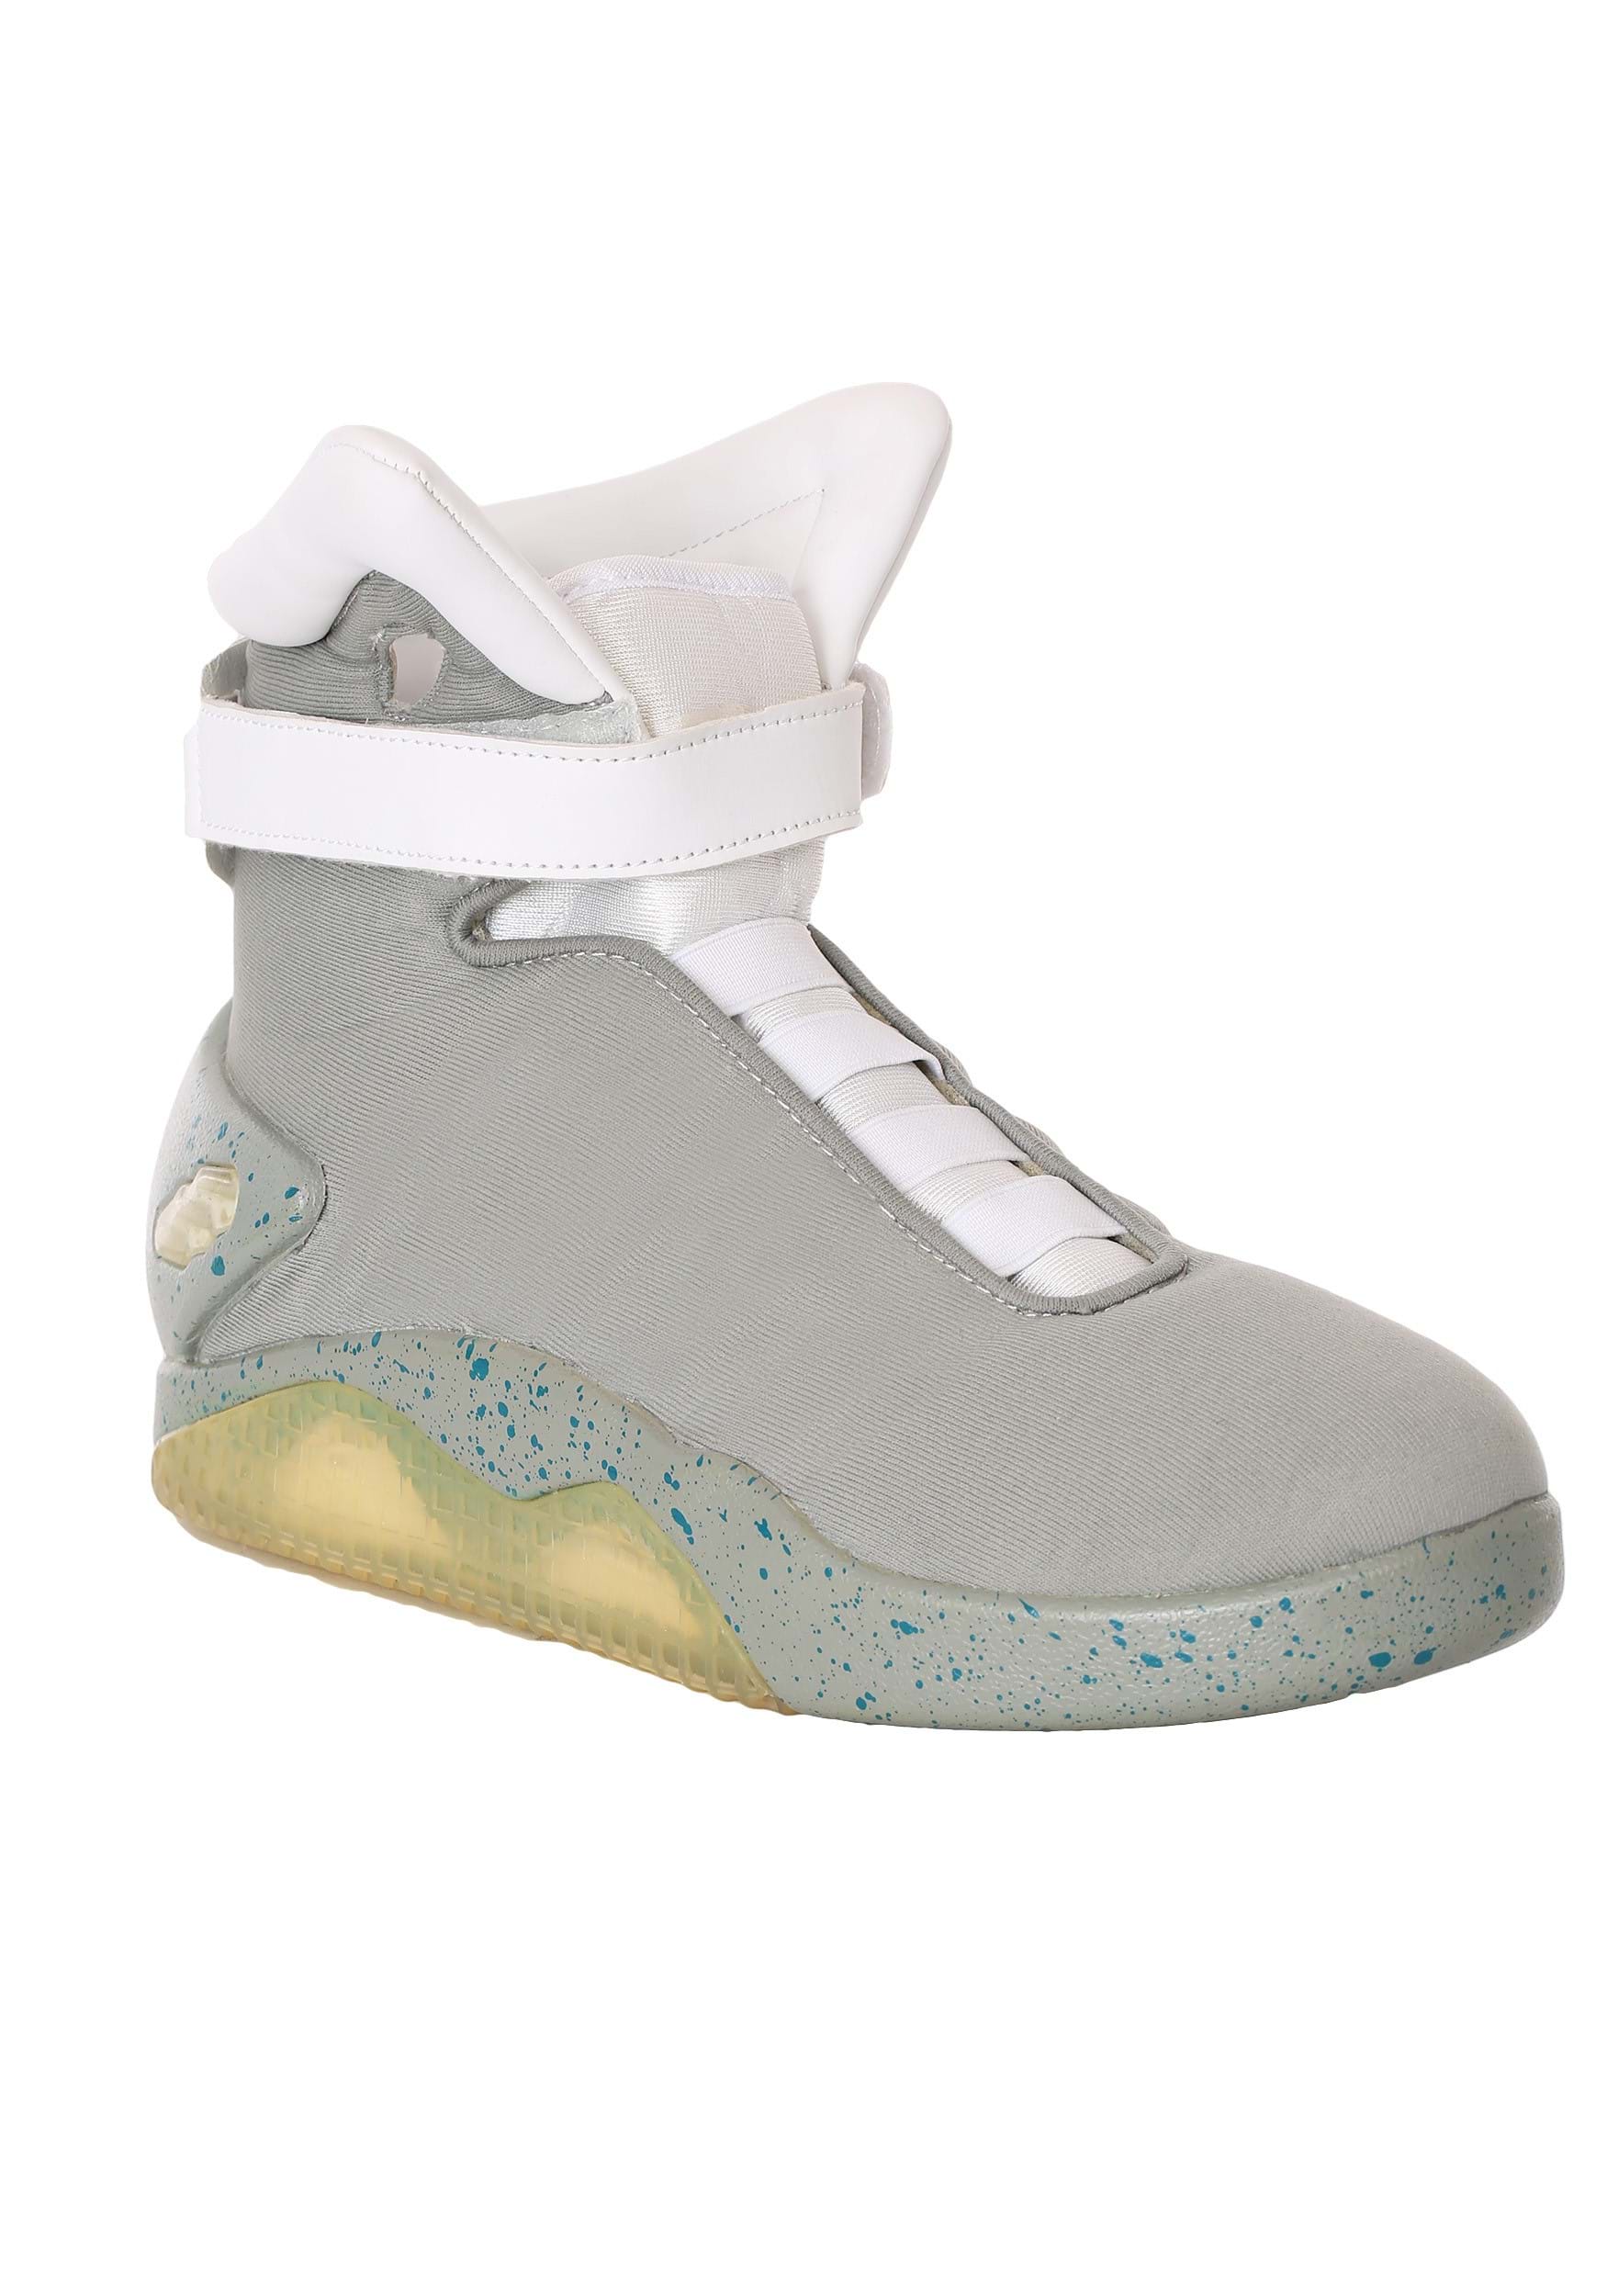 Back to the Future Part II Light Up Shoes